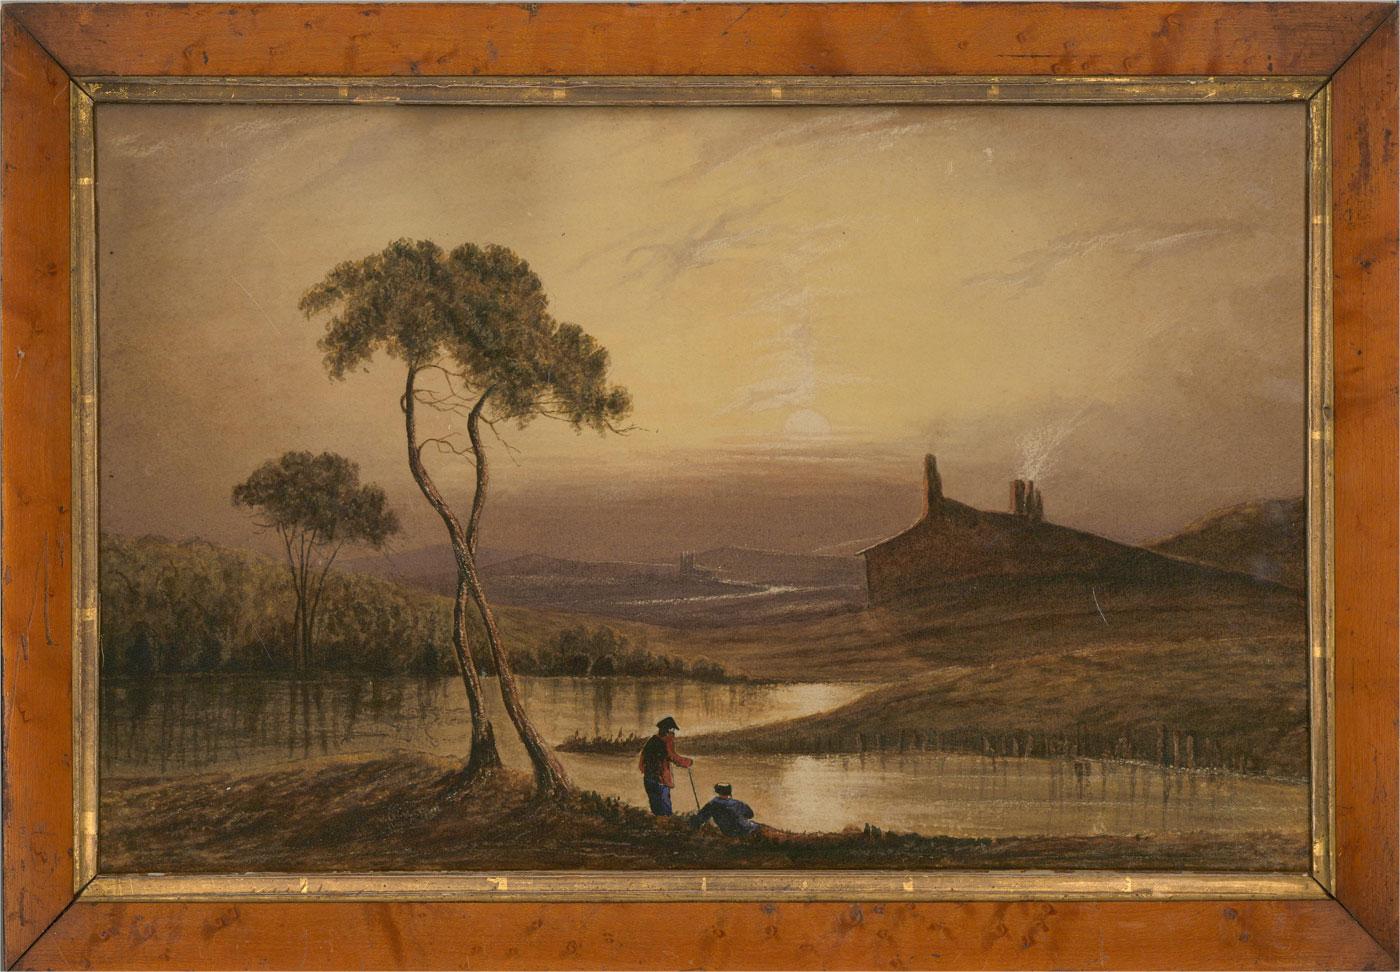 A late-18th century watercolour with body colour depicting two figures resting by a lake. The viewer joins these figures in looking out at the sweeping landscape that stretches into the distance. Presented glazed in a burr wood frame with a